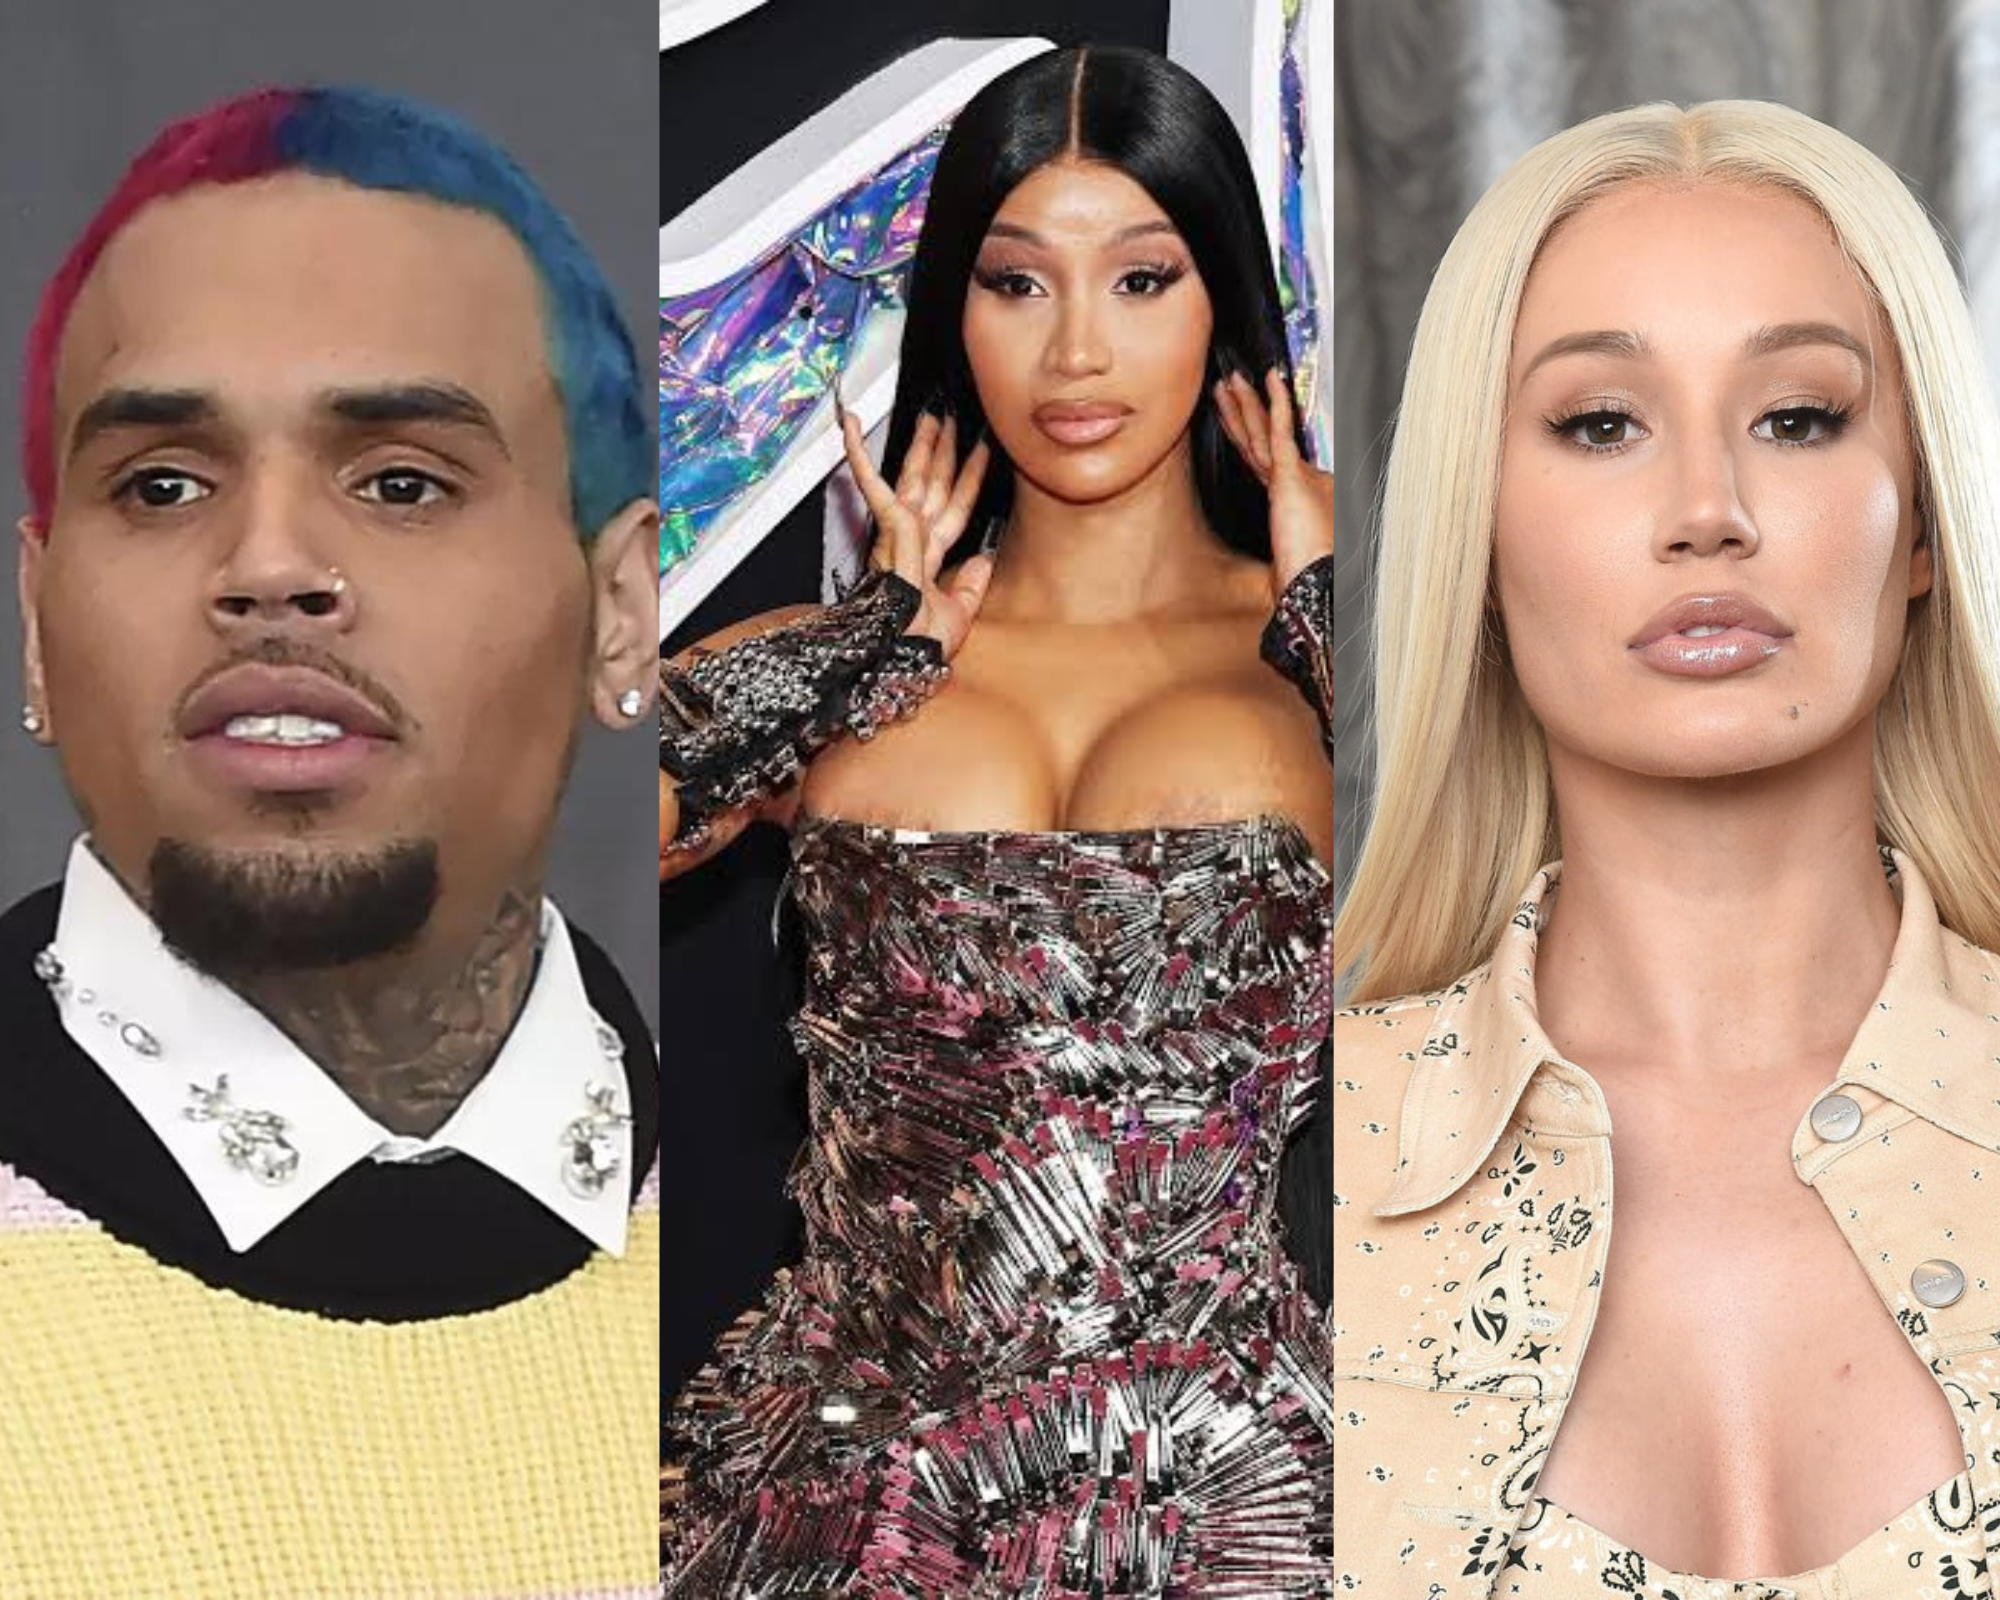 Chris Brown, Cardi B and Iggy Azalea among top 10 highest earning musicians  on OnlyFans